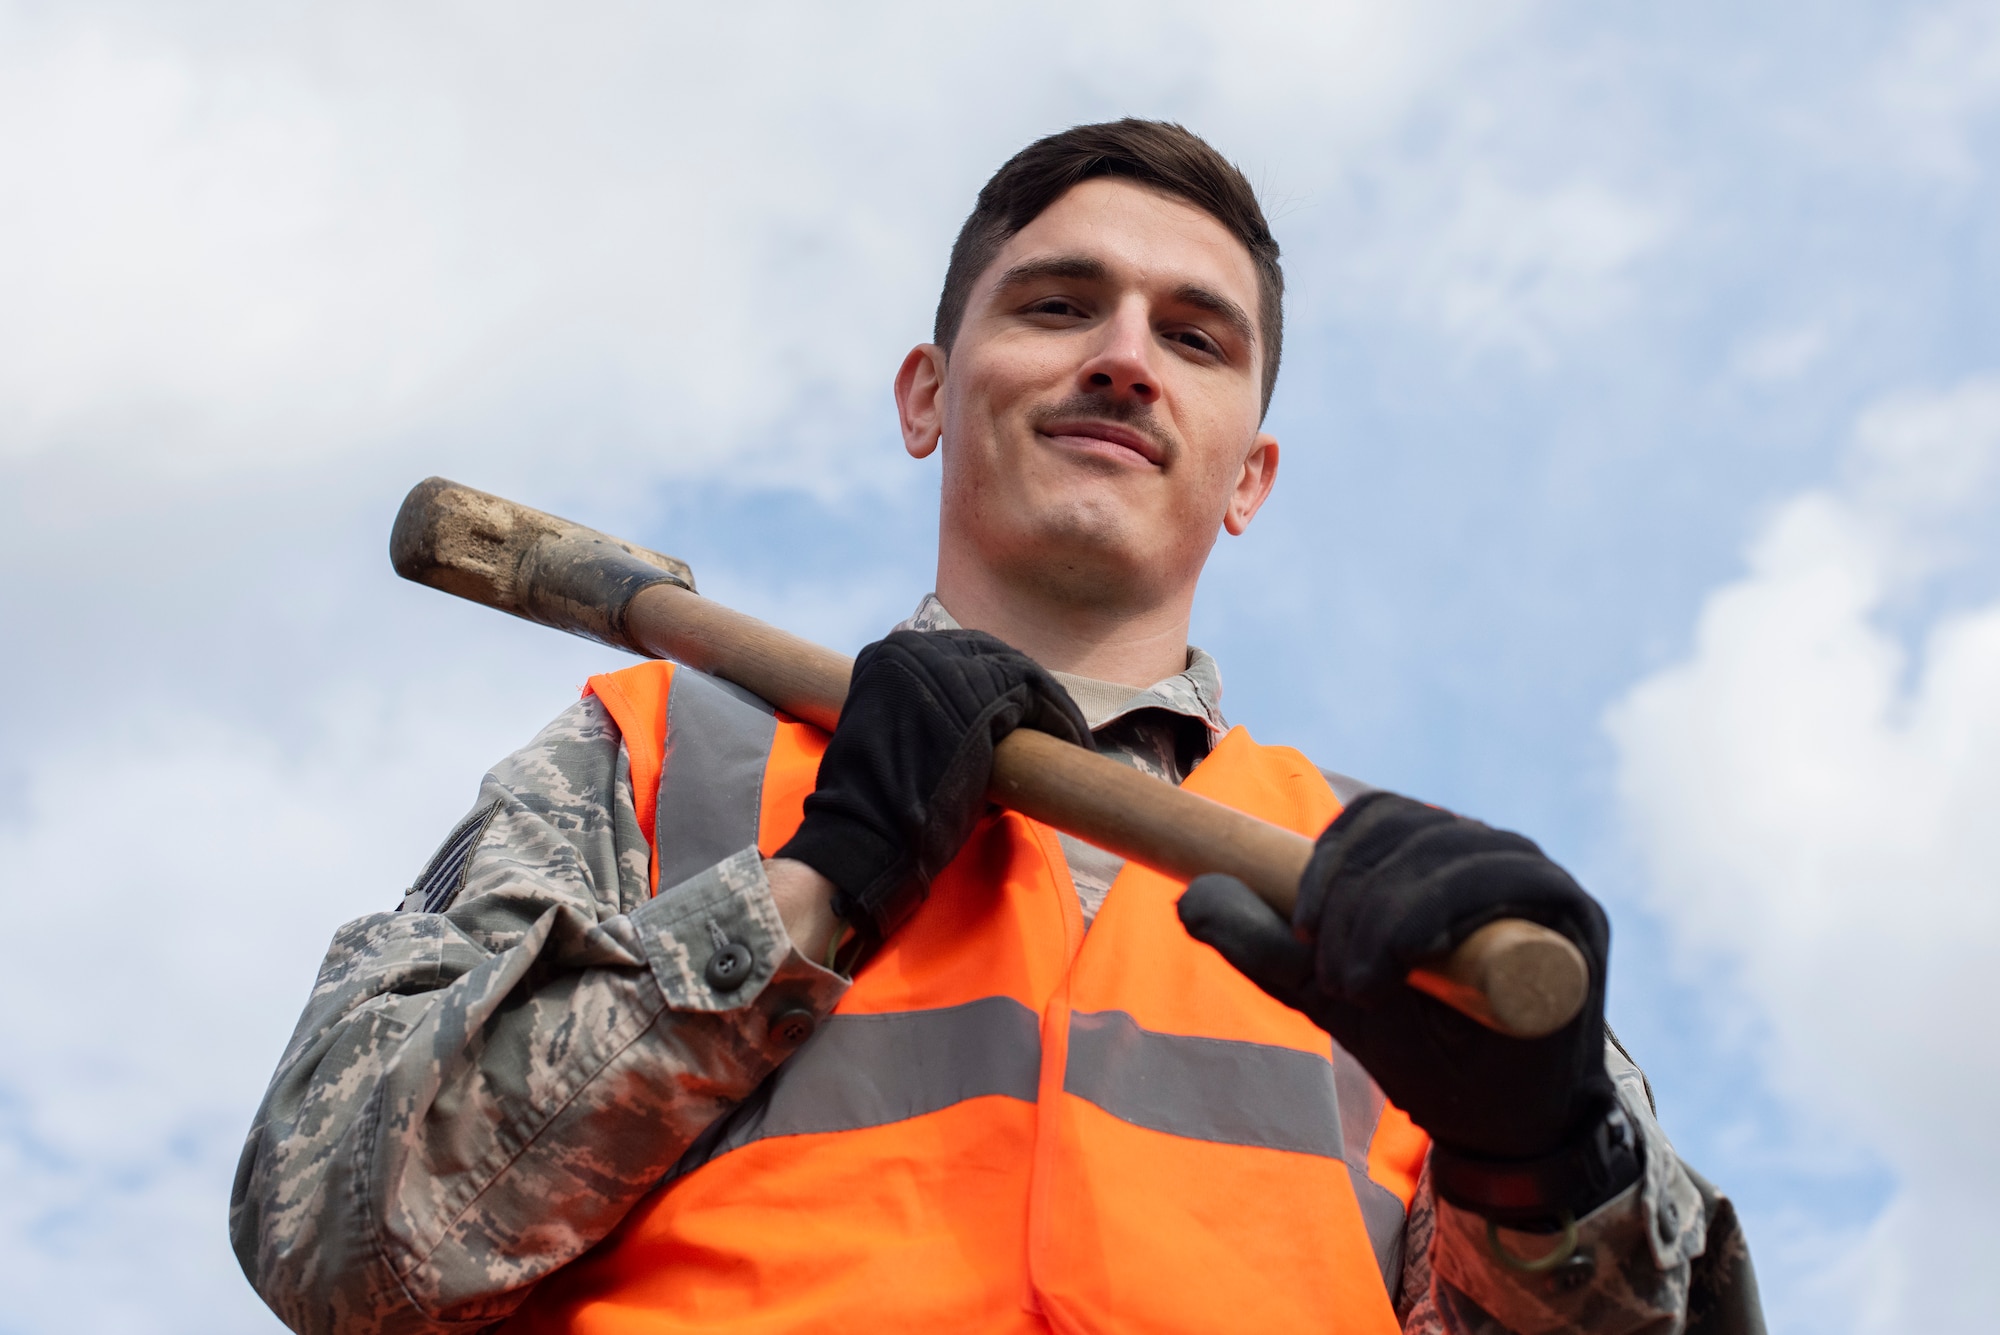 Staff Sgt. Rihlen Mital, 100th Civil Engineer Squadron pavements and construction equipment journeyman, poses for a photo as a “Dirt Boy” during a sidewalk construction project March 11, 2020, at RAF Mildenhall, England. “Dirt Boyz” work in a variety of weather conditions when completing construction projects in support of the mission. (U.S. Air Force photo by Airman 1st Class Joseph Barron)